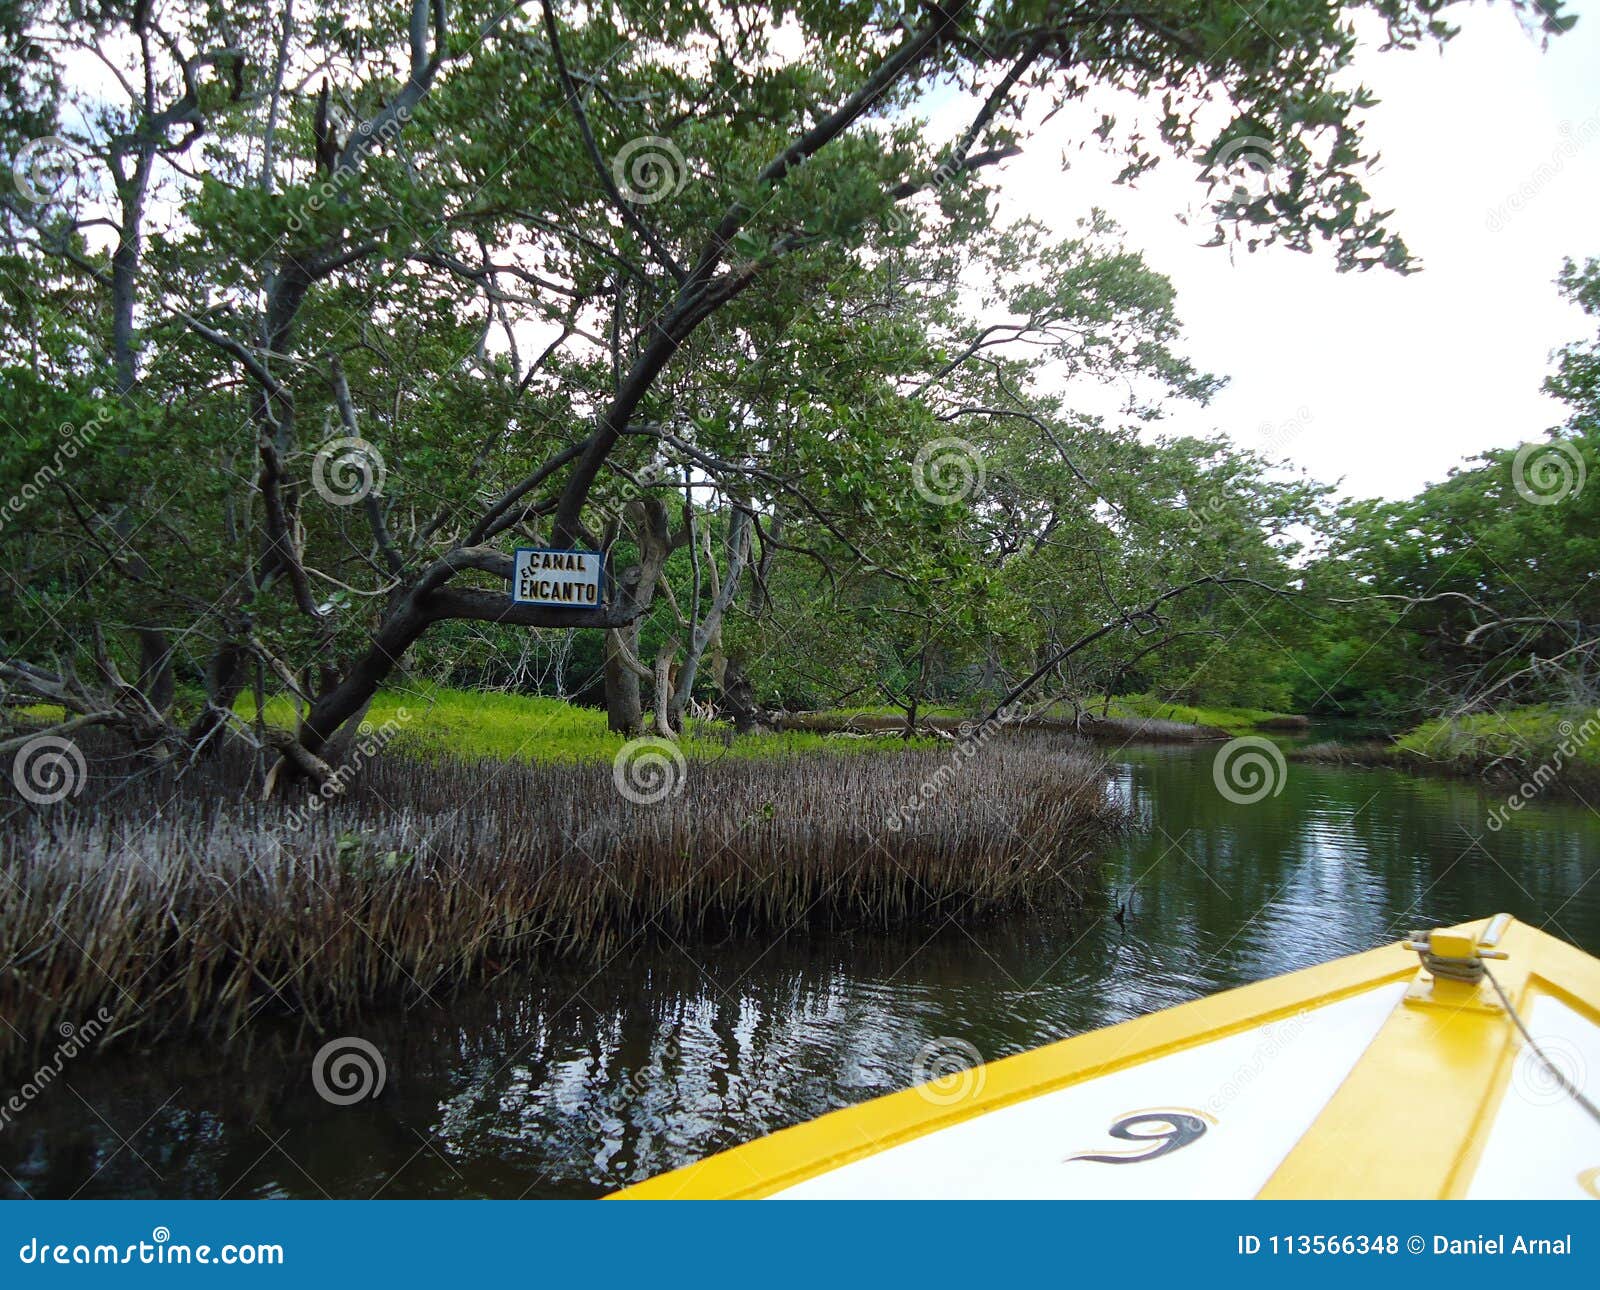 the channel of charm in a mangrove swamp